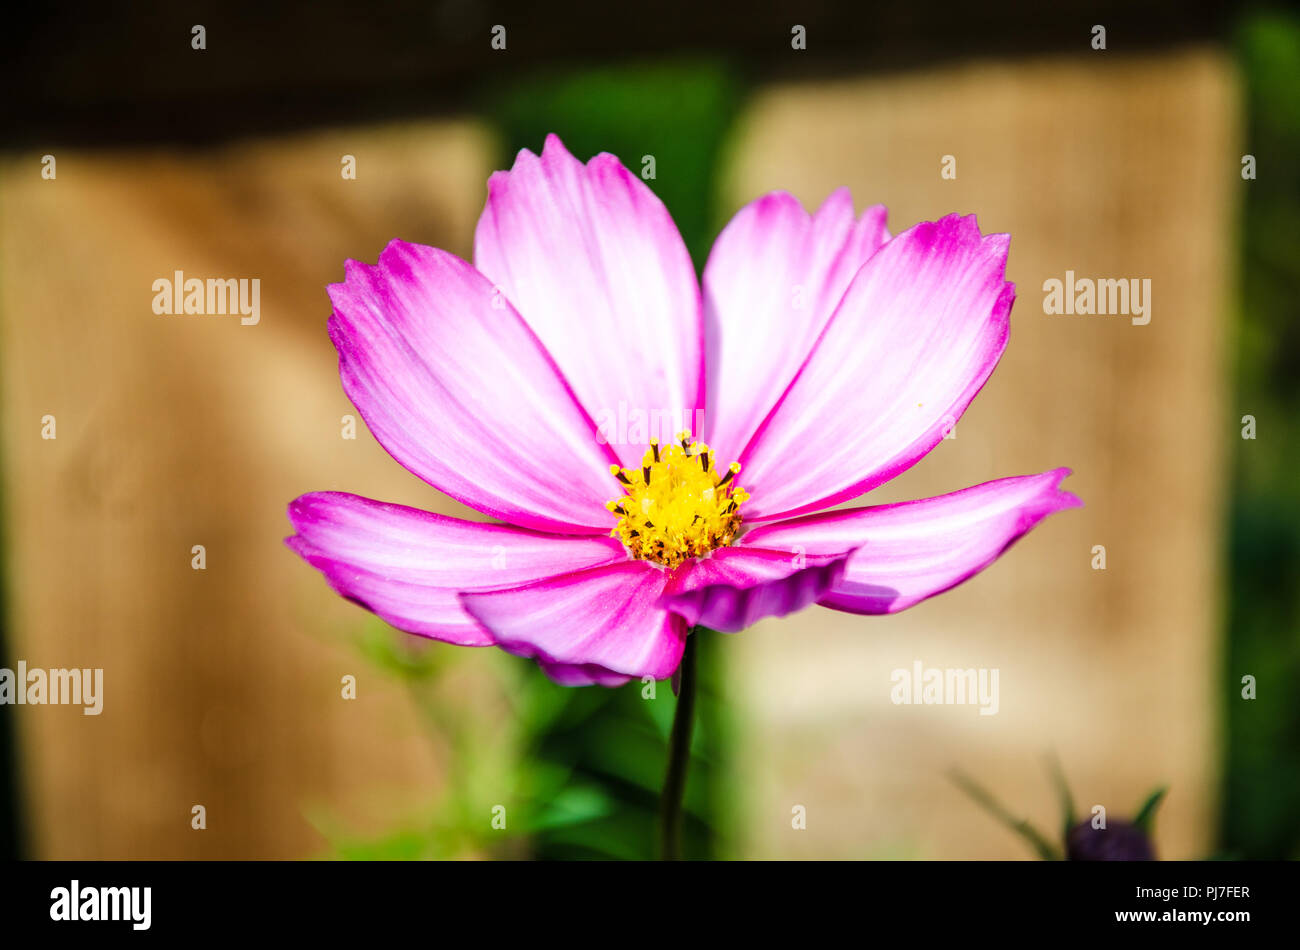 Close up view of pink cosmos flowers in a garden. Stock Photo